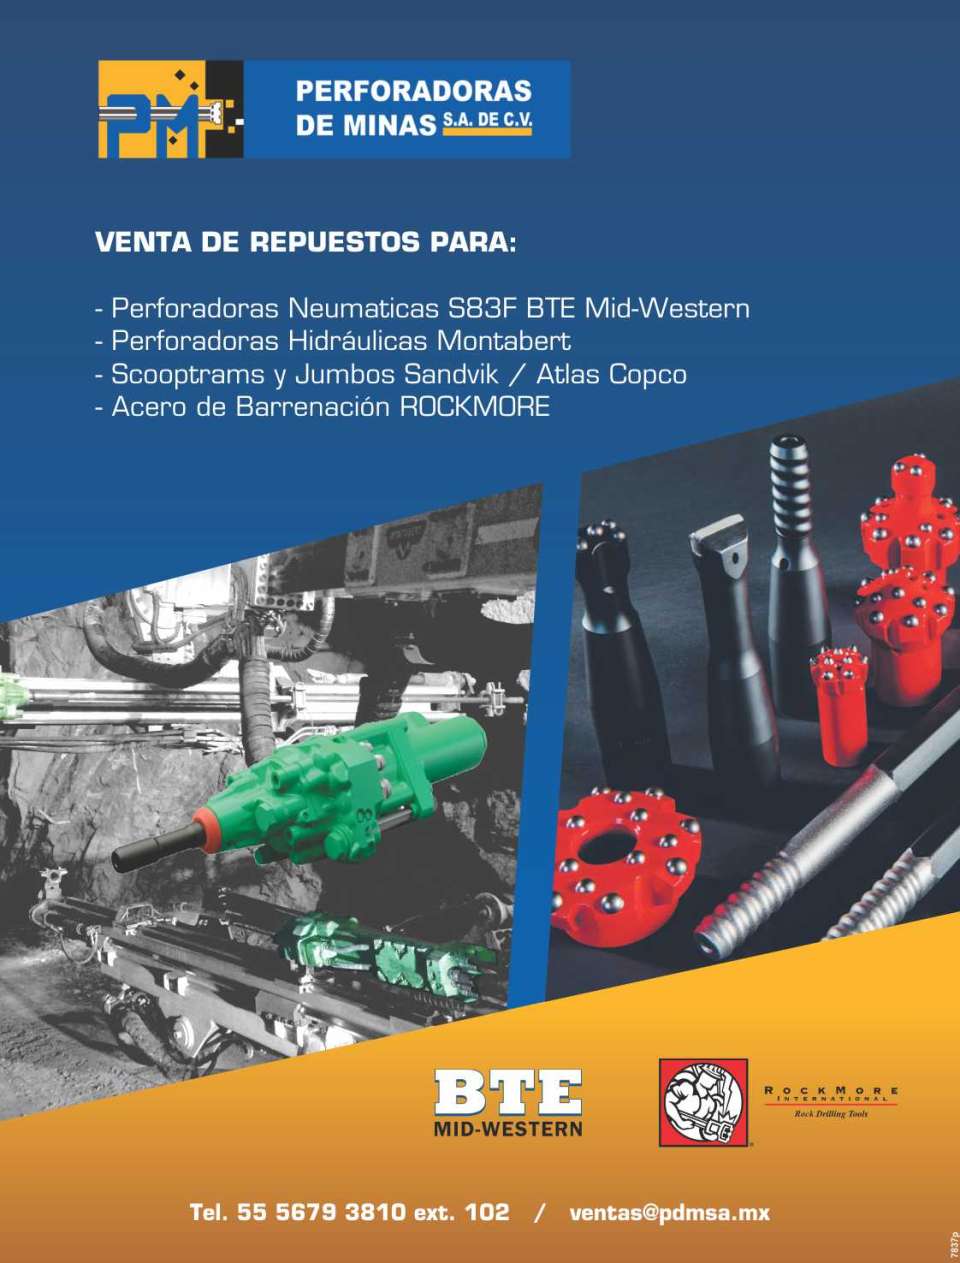 Sale of Spare Parts for S83F BTE Mid Western Pneumatic Drills, Montabert Hydraulic Drills, Scooptrams and Sandvik / Atlas Copco Jumbos, ROCKMORE Drilling Steel